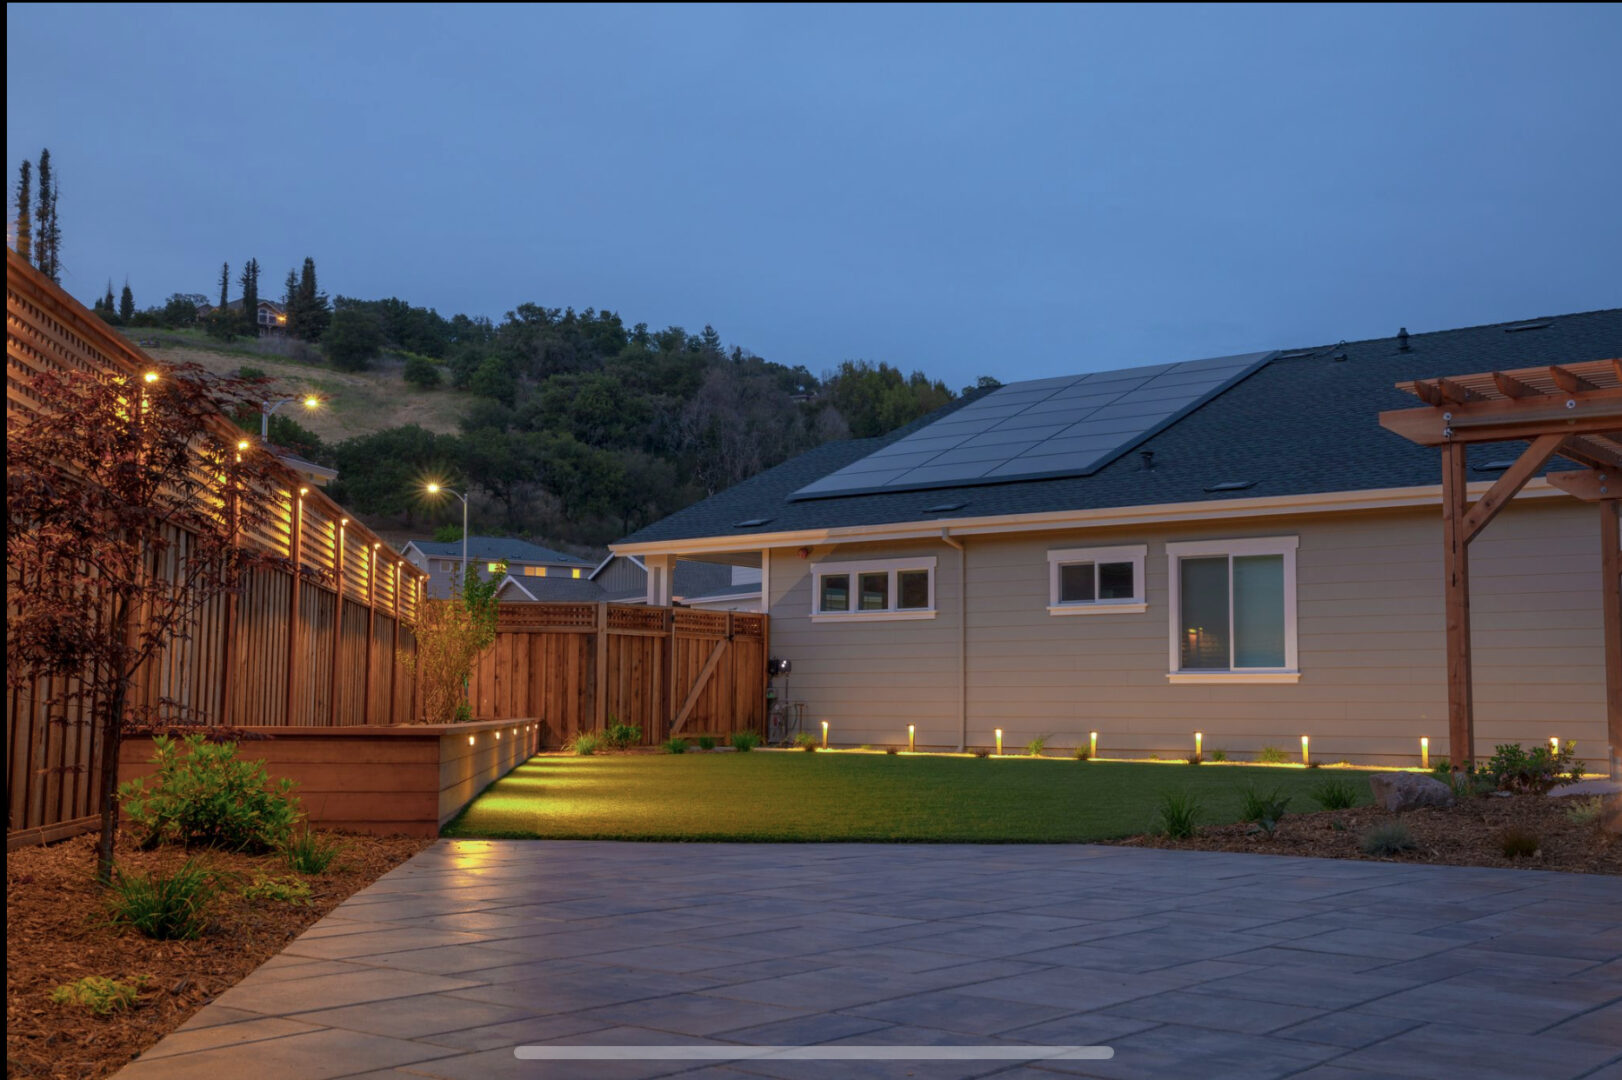 Tiles, pebbles, path lights, landscaping project by Guys Yard Design in Sonoma, CA